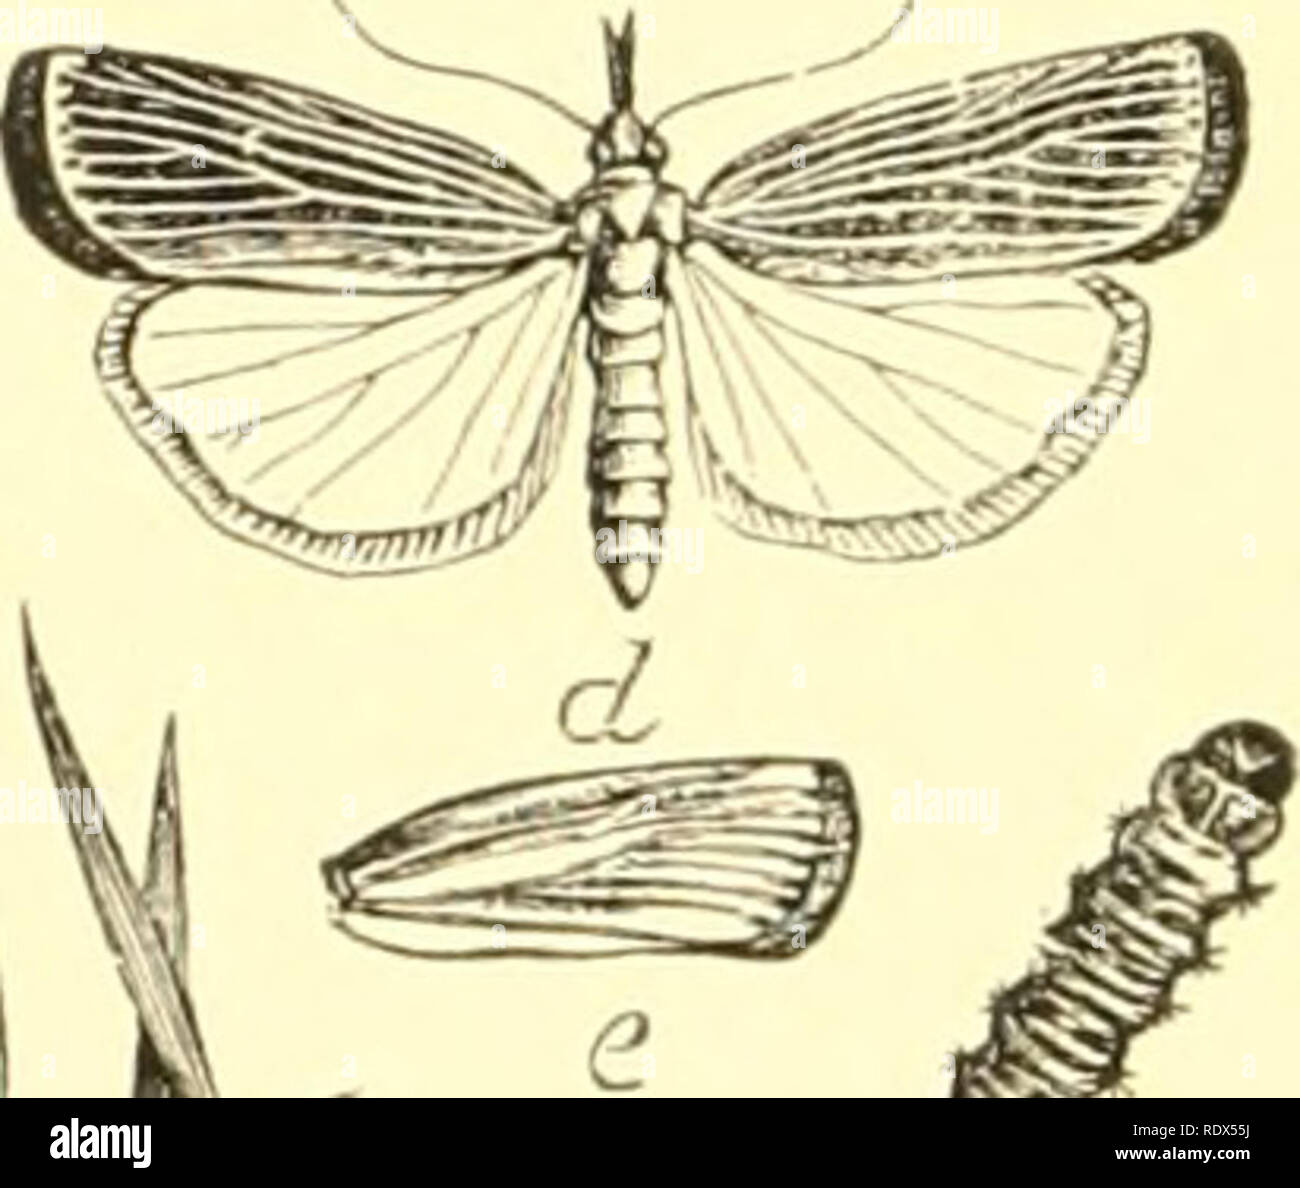 . Economic entomology for the farmer and the fruit grower, and for use as a text-book in agricultural schools and colleges;. Insects; Pests. -jJteiC^,^.^^^ &quot;5«- Crambus vulvivaf;elhi!i.—a, larva ; b, over-, and r, underground tube and cocoon ; d, e, /, moths with wuigs spread and at rest ; g, an egg much enlarged. up or f&lt;^lded closely, giving the insect a little the appearance ot a tiny cylinder. The head is small, not at all retracted, and usually furnished with very long palpi that project straight out like a snout ; as a whole, resembling somewhat one of the groups of the deltoid N Stock Photo